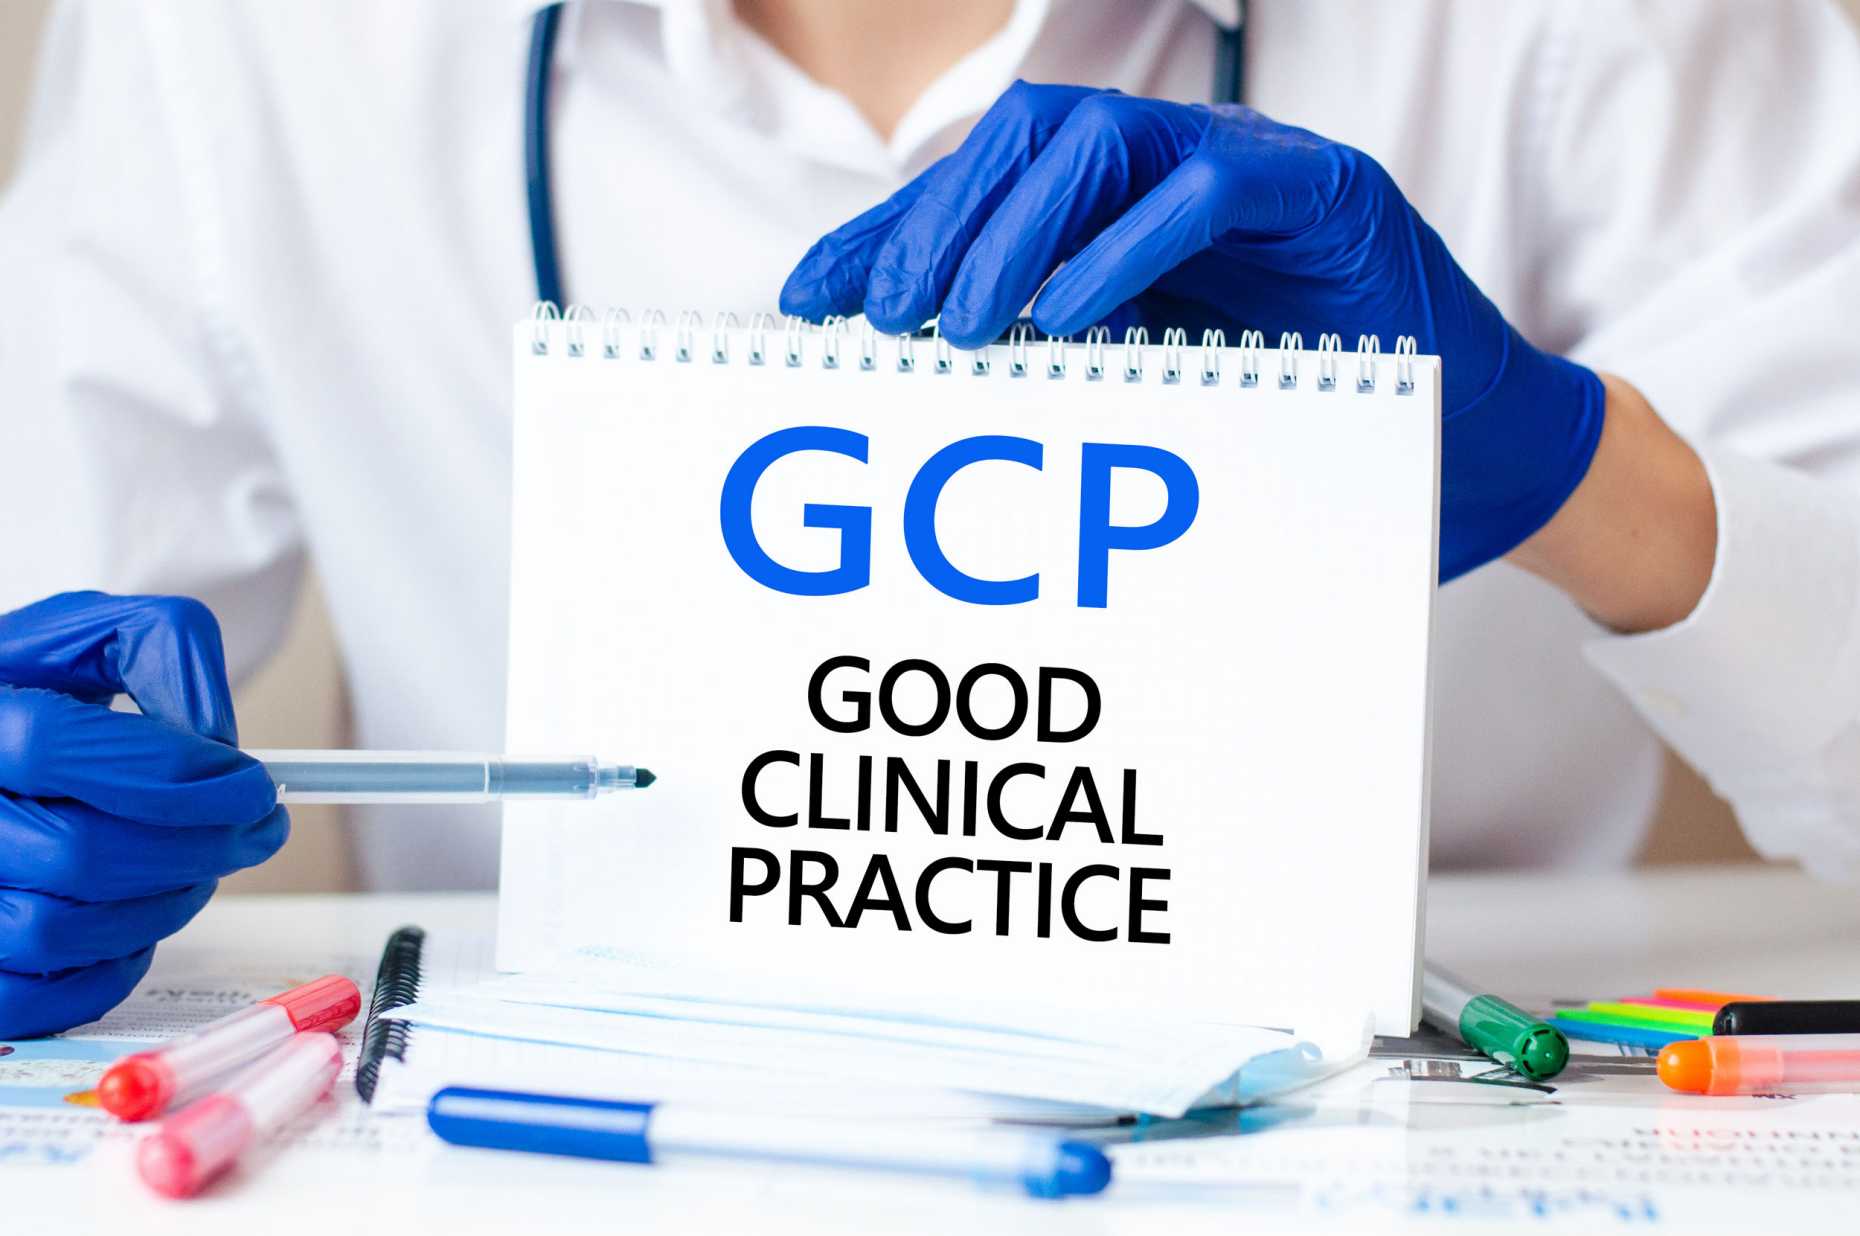 Good Clinical Practice